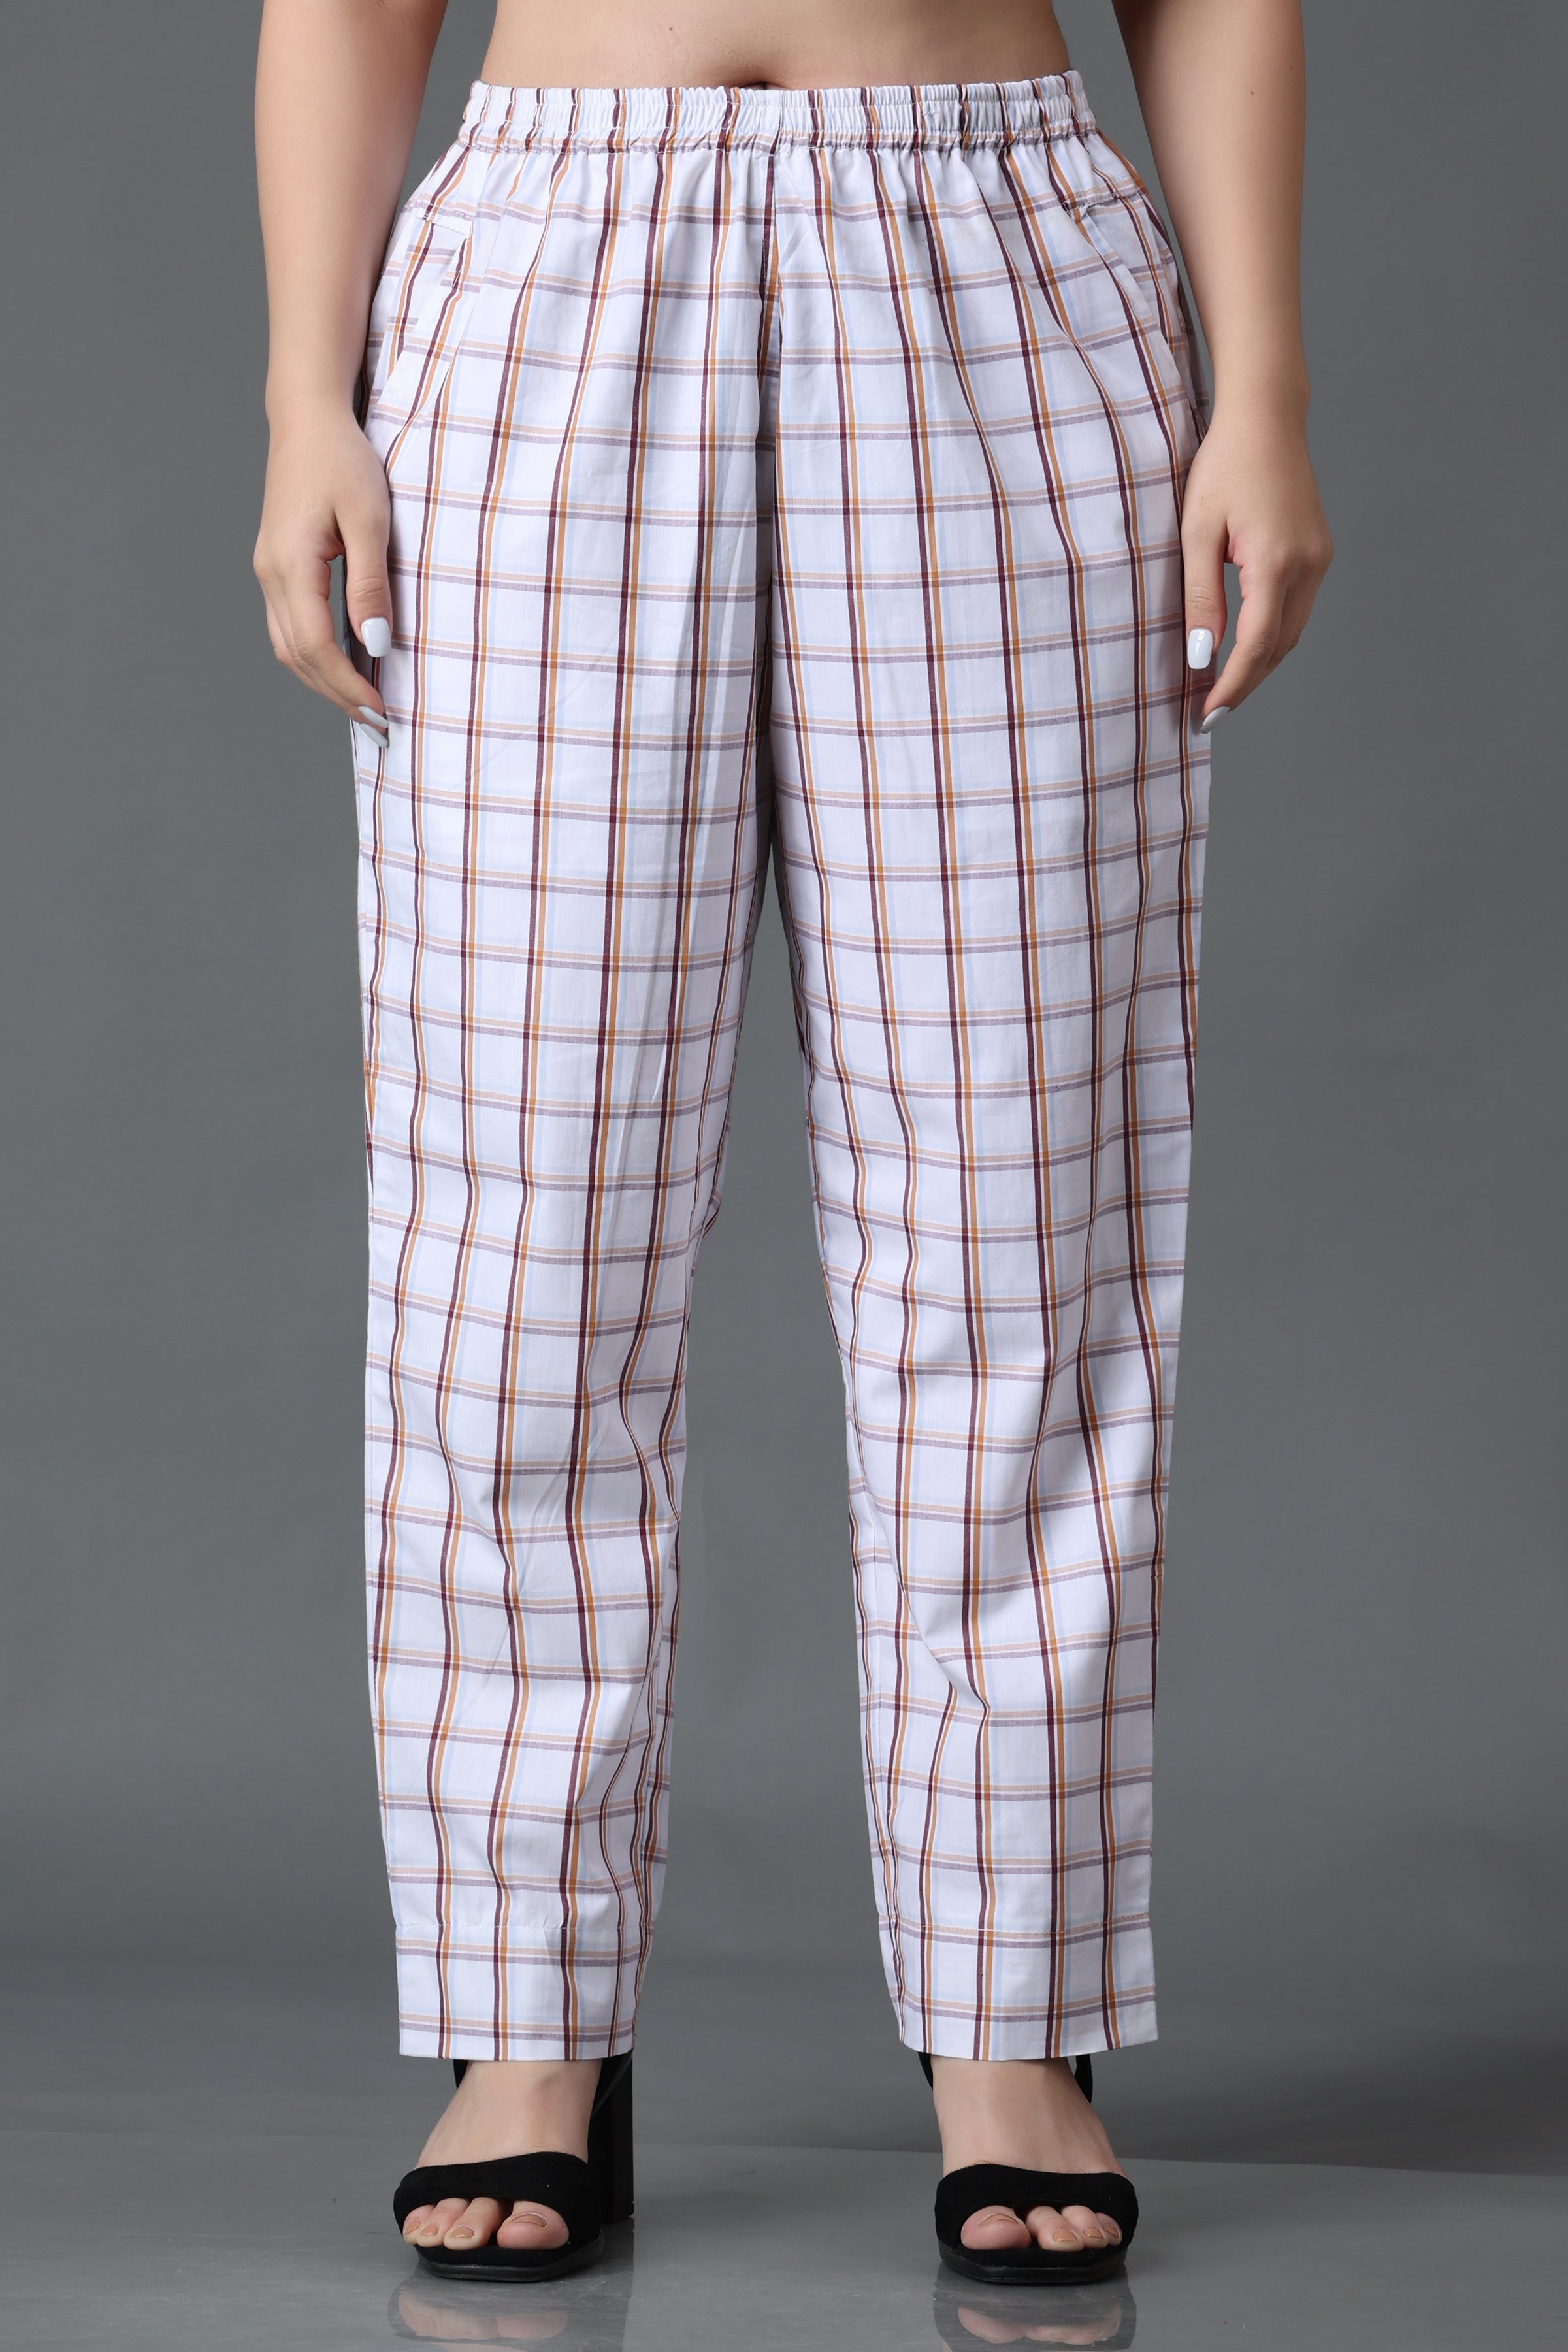 Burberry Ladies Optic White Location Print Trousers | World of Watches